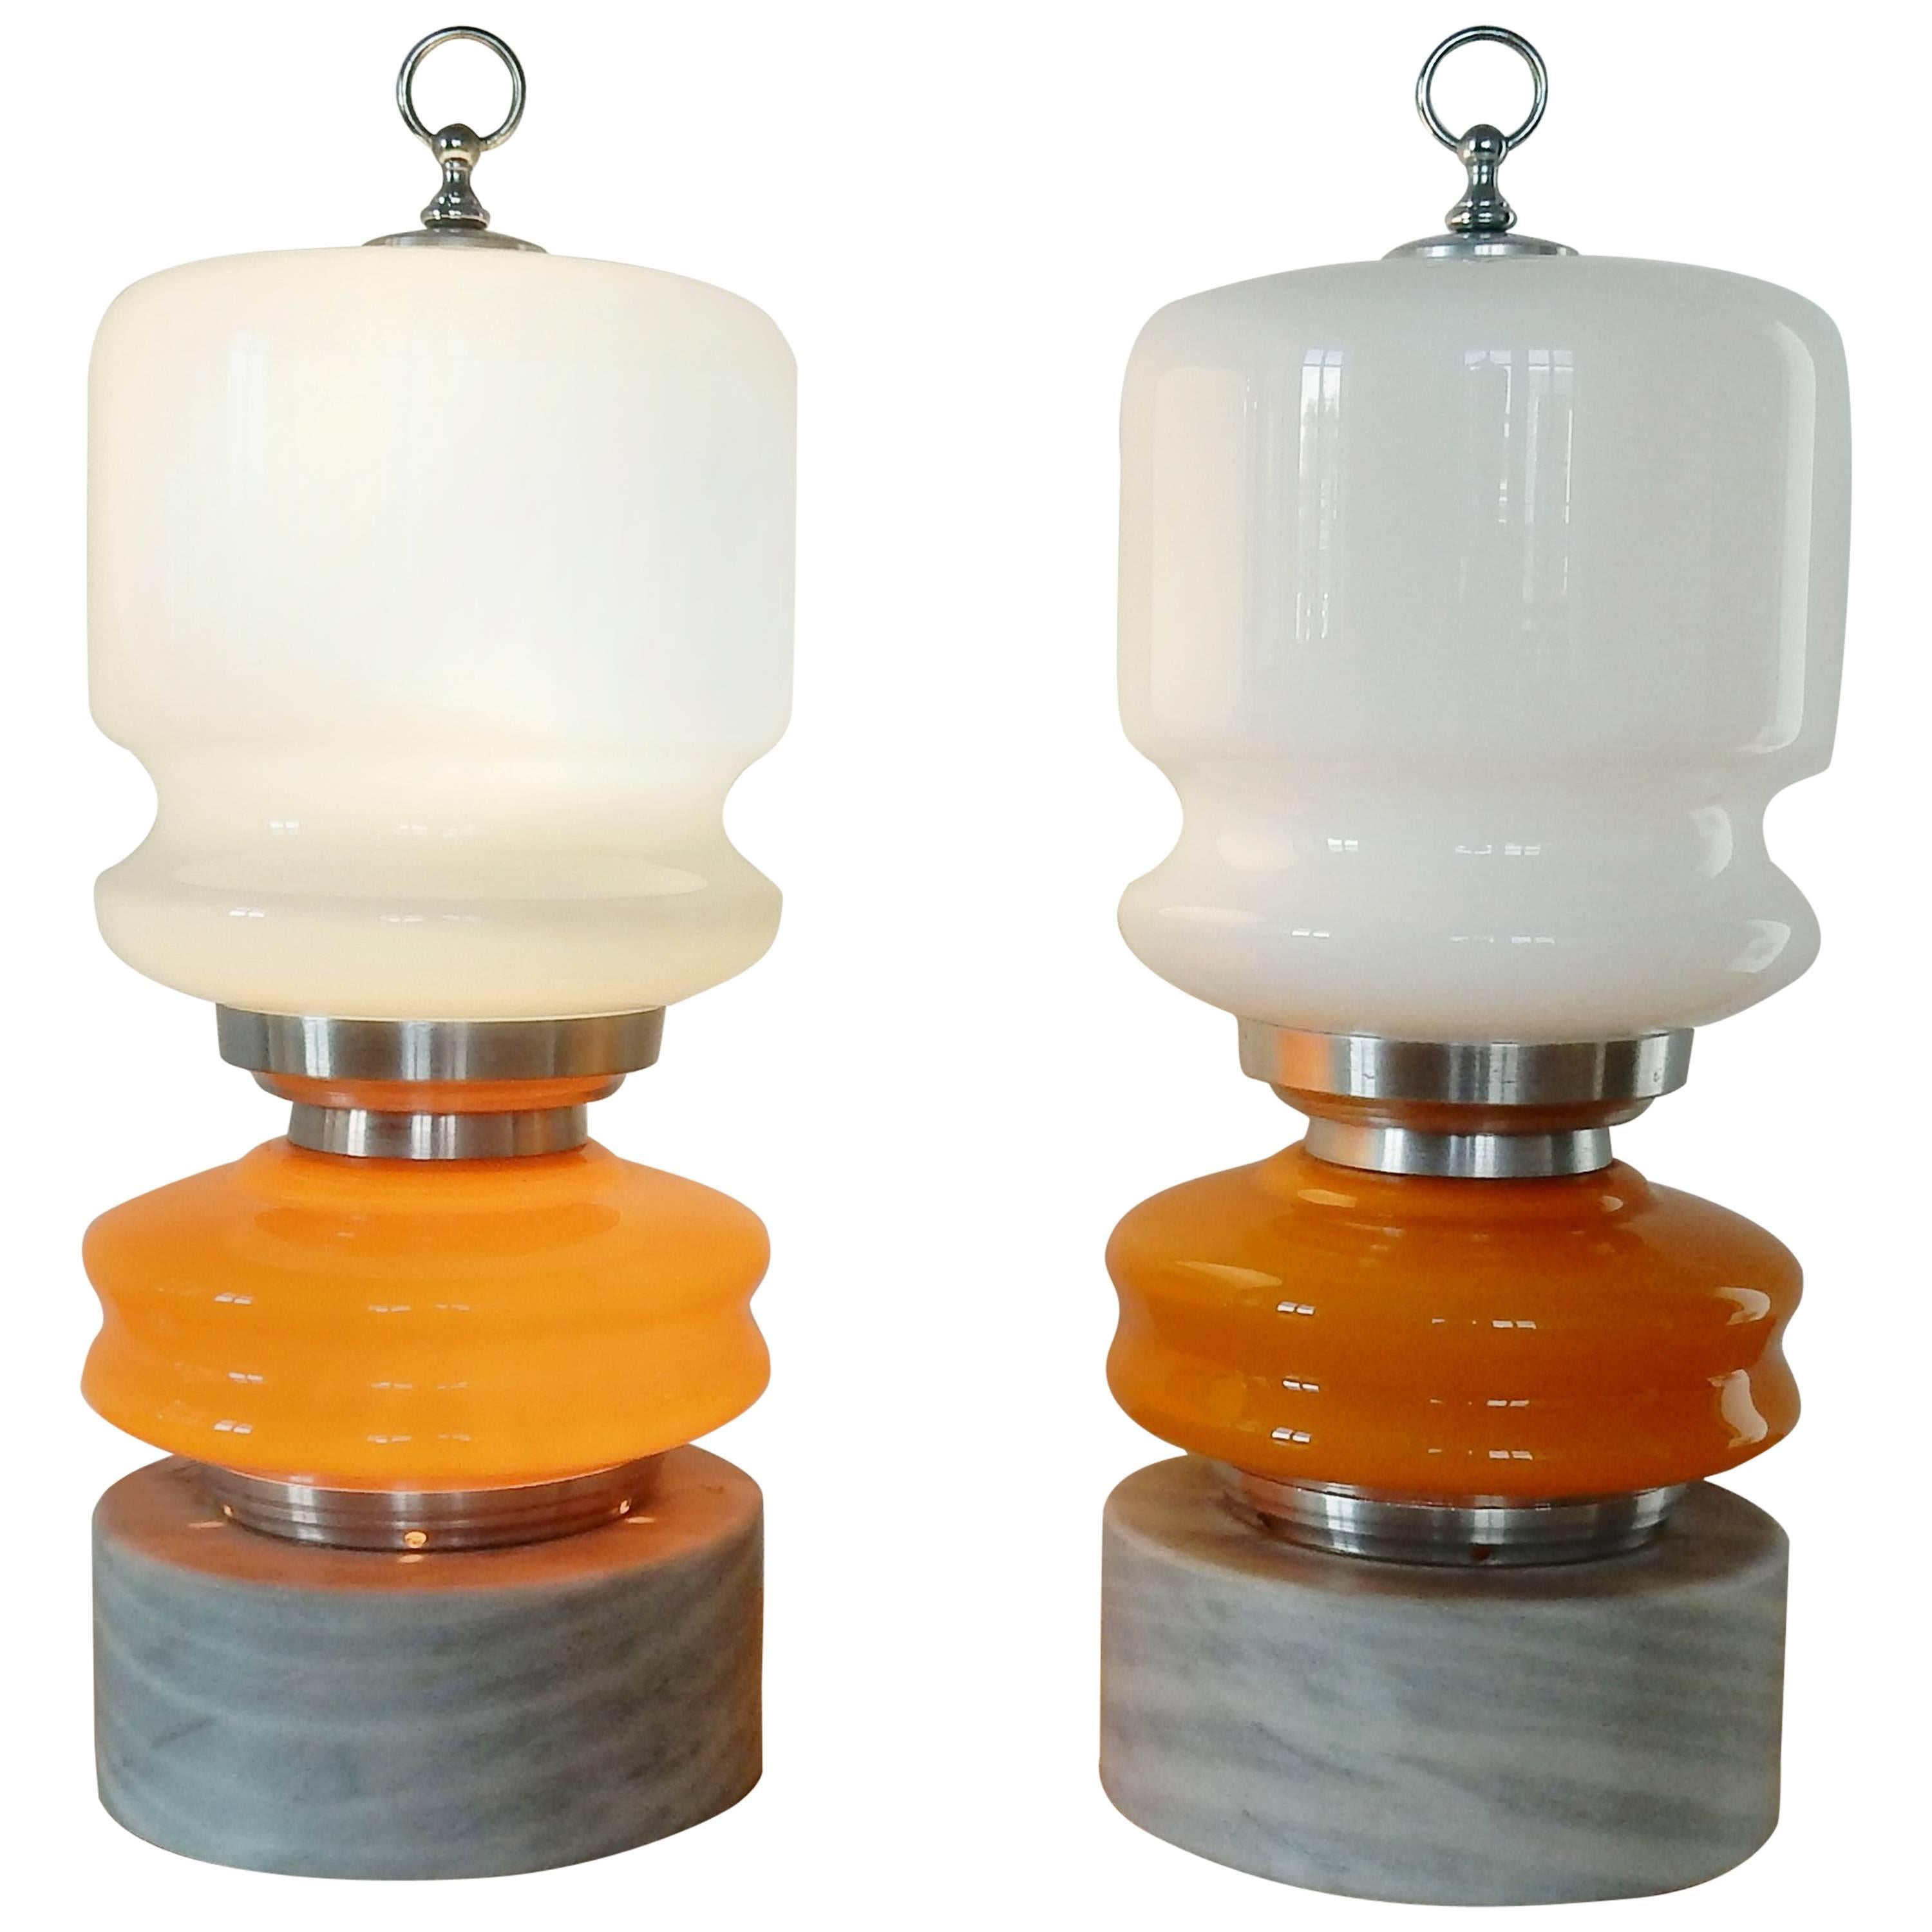 Two Large Orange and White Glass Table Lamps on Stone Pedestal, 60's/70's